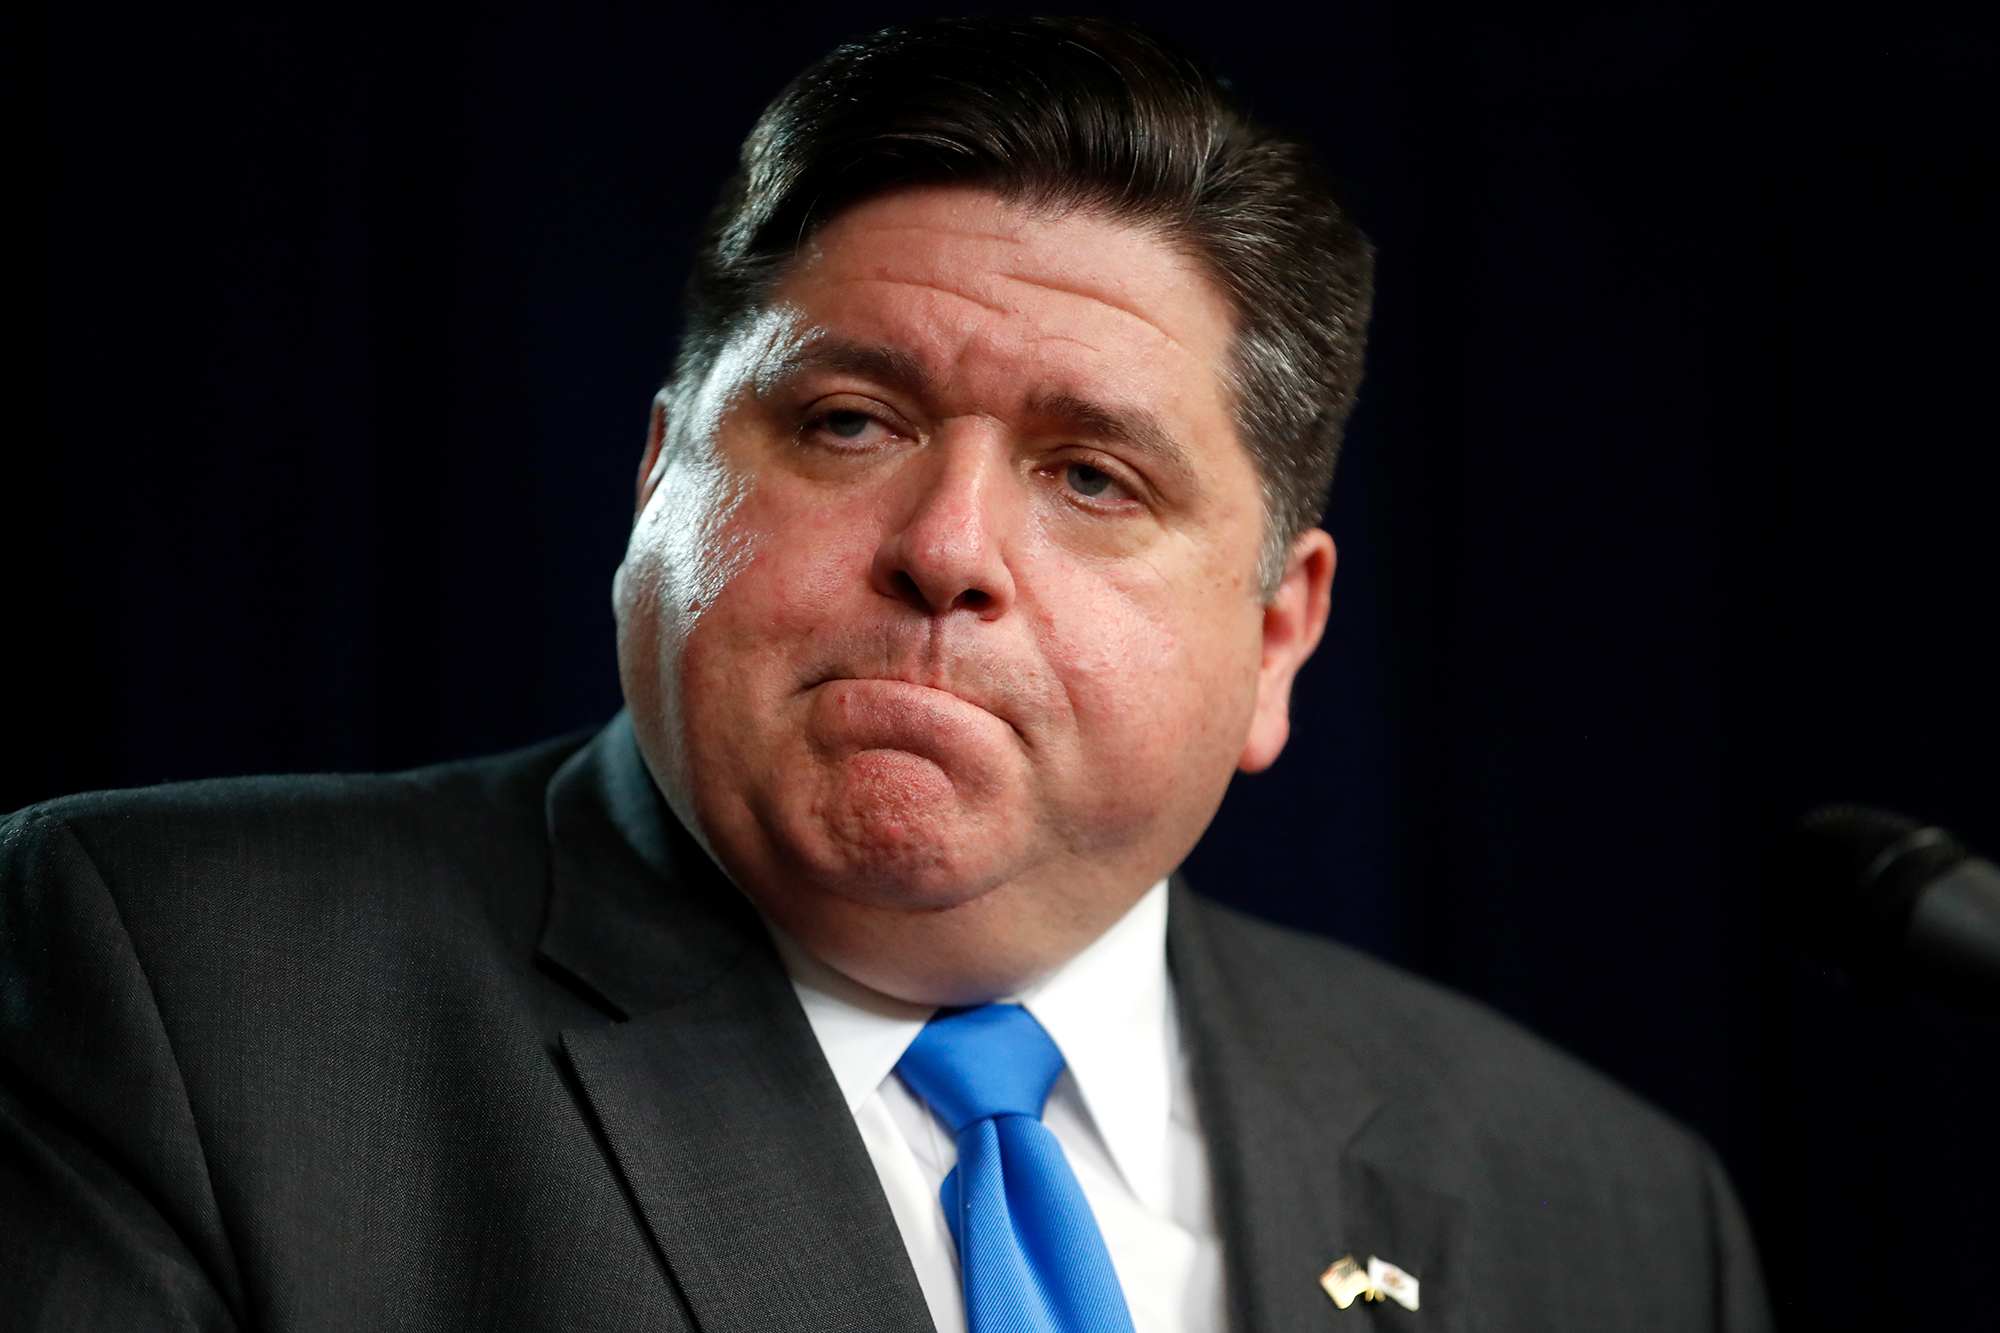 Illinois Gov. J.B. Pritzker listens to a question after announcing a shelter-in-place order to combat the spread of the coronavirus during a news conference Friday, March 20, in Chicago.